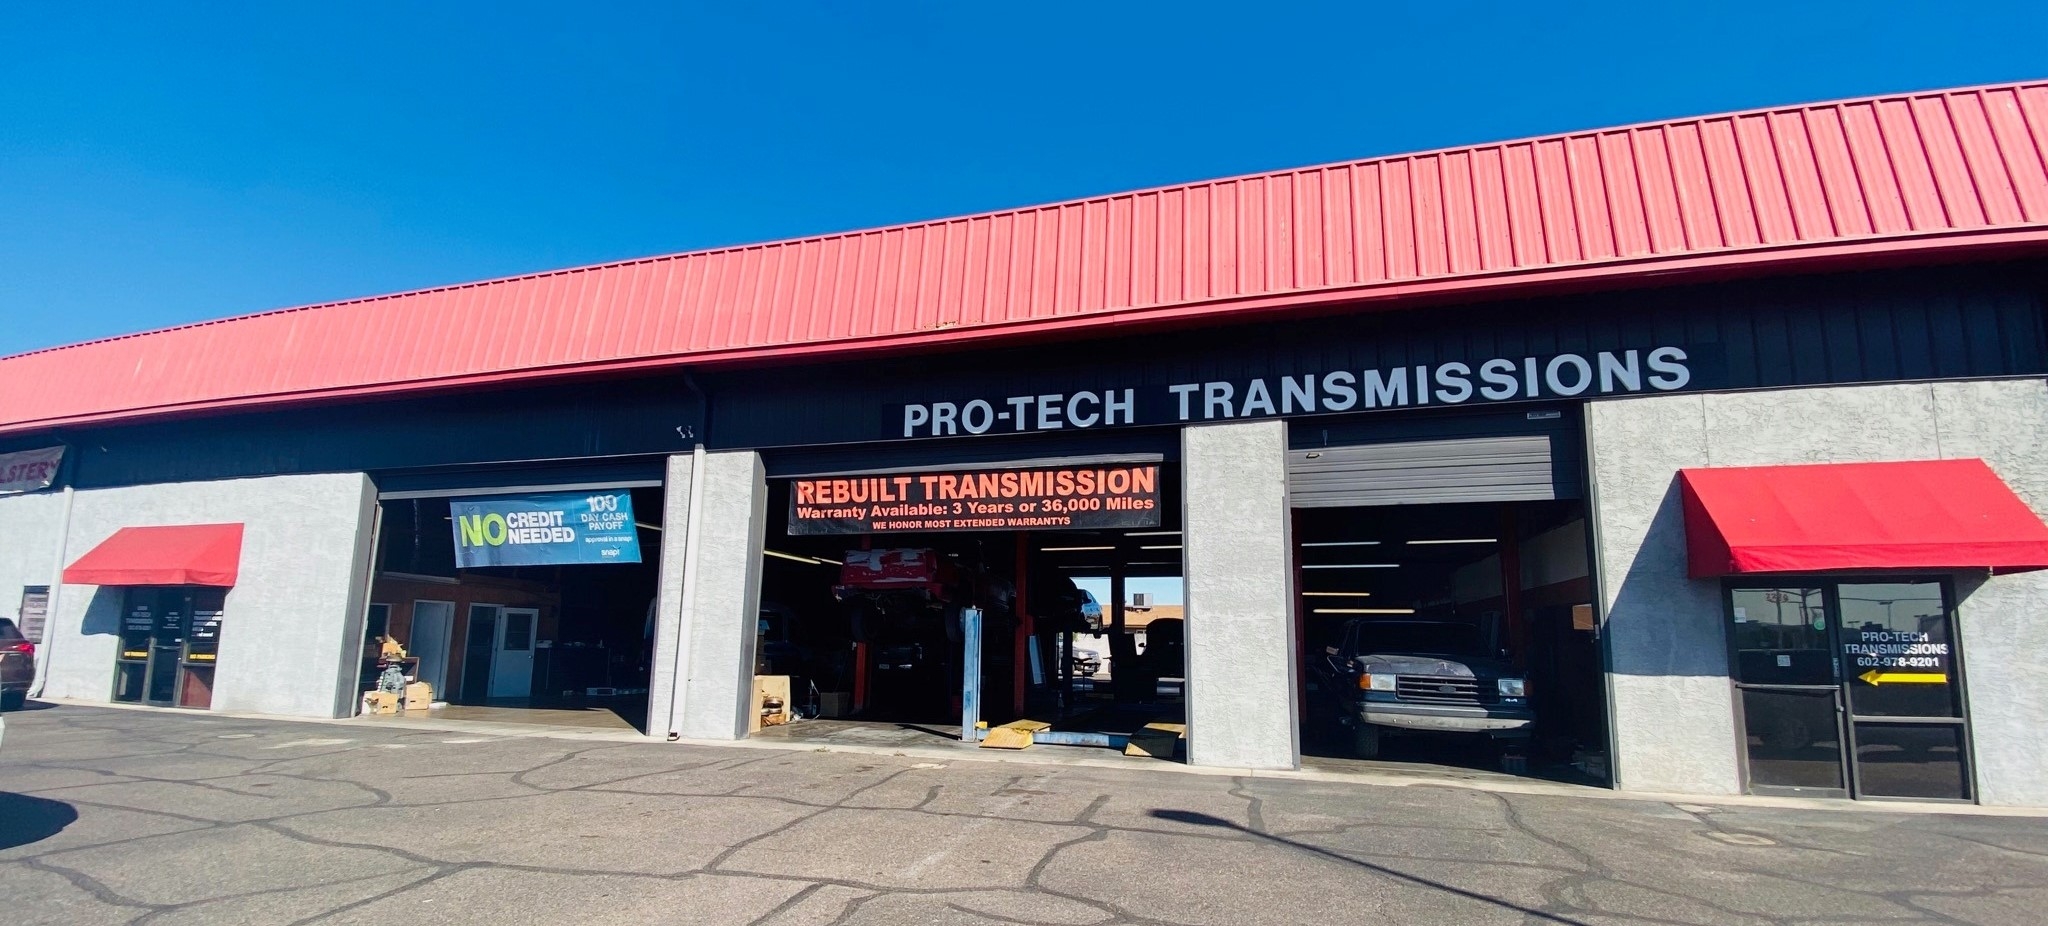 What is the most effective Transmission Store in Glendale, AZ?